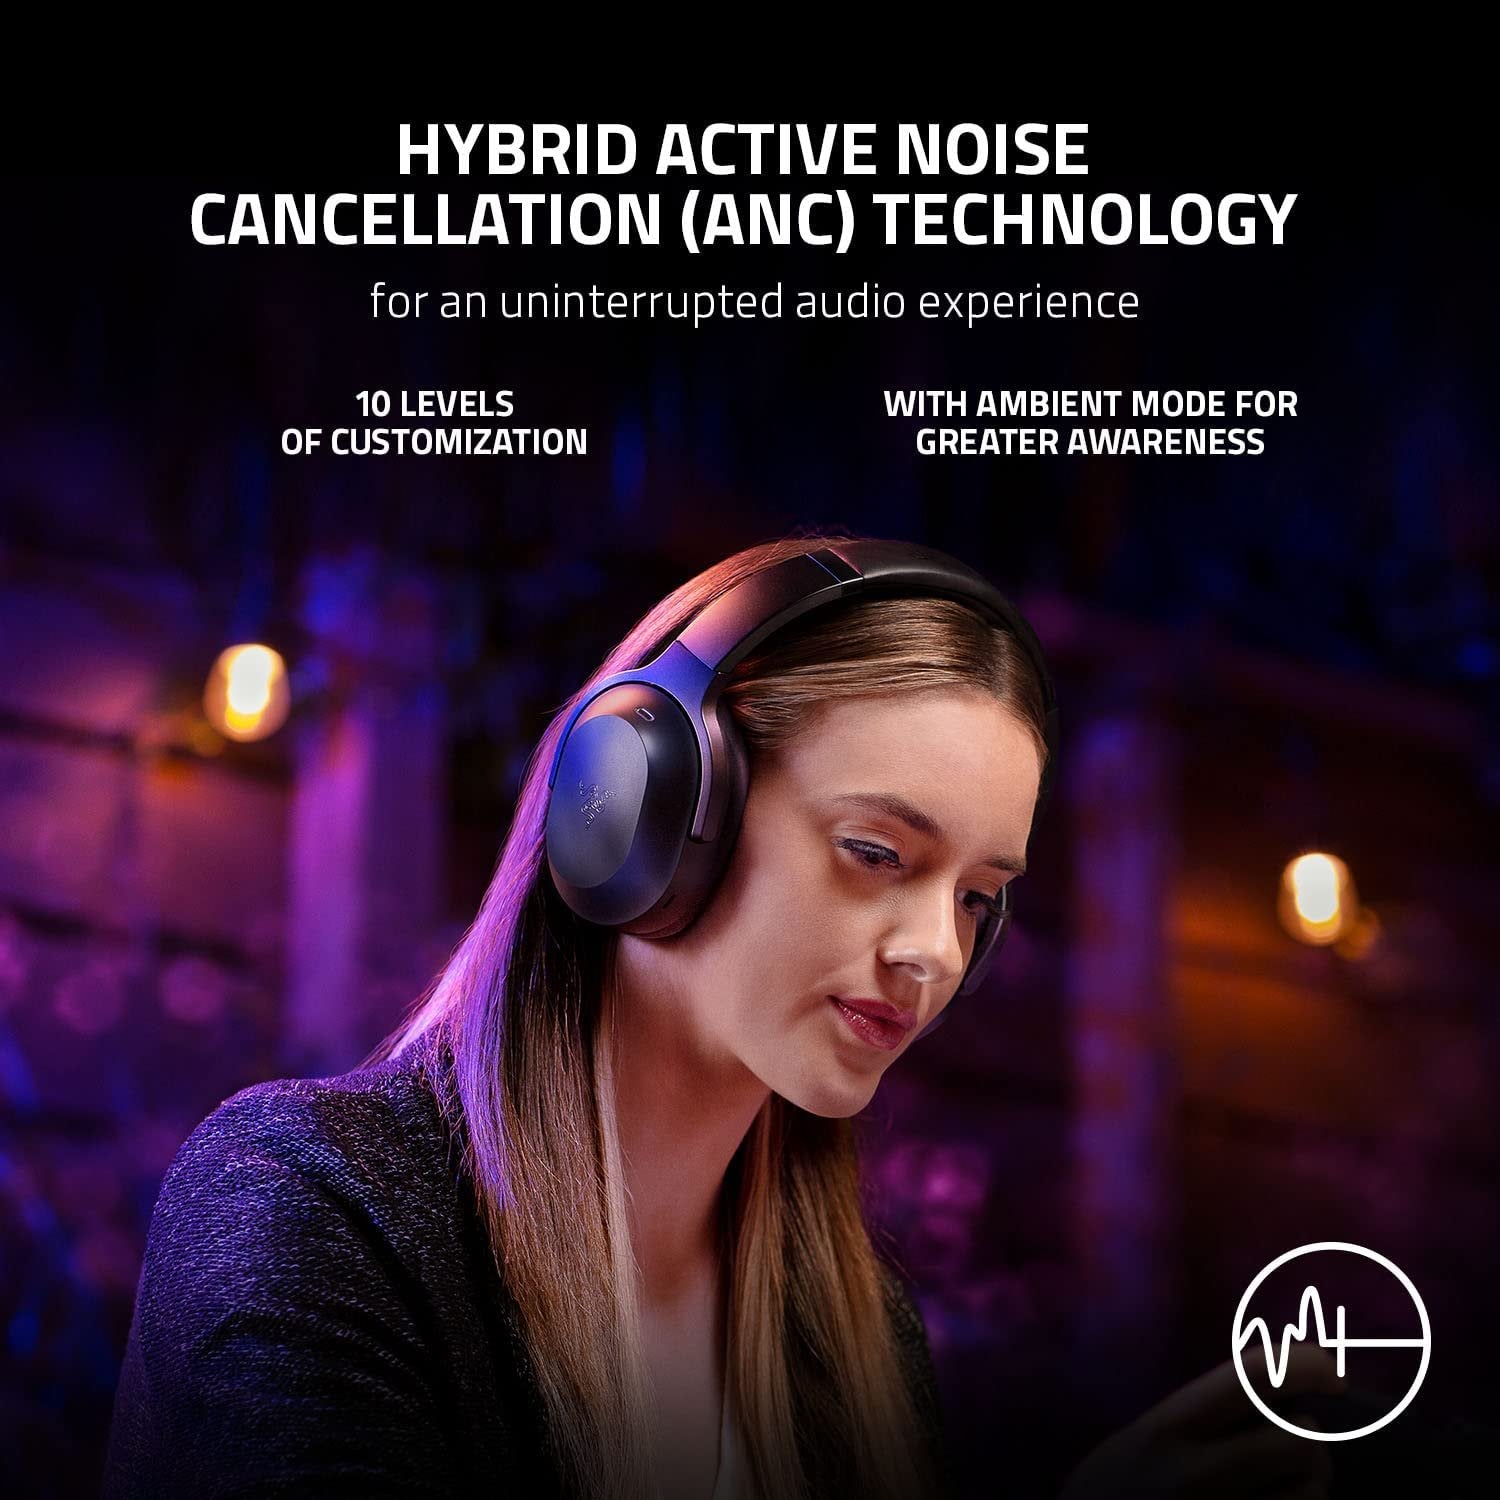 Razer Barracuda Pro Wireless Gaming & Mobile Headset (PC, PlayStation, Switch, Android, iOS): Hybrid ANC - 2.4GHz Wireless + Bluetooth - THX AAA - 50mm Drivers - Integrated Mic- Black (Renewed)